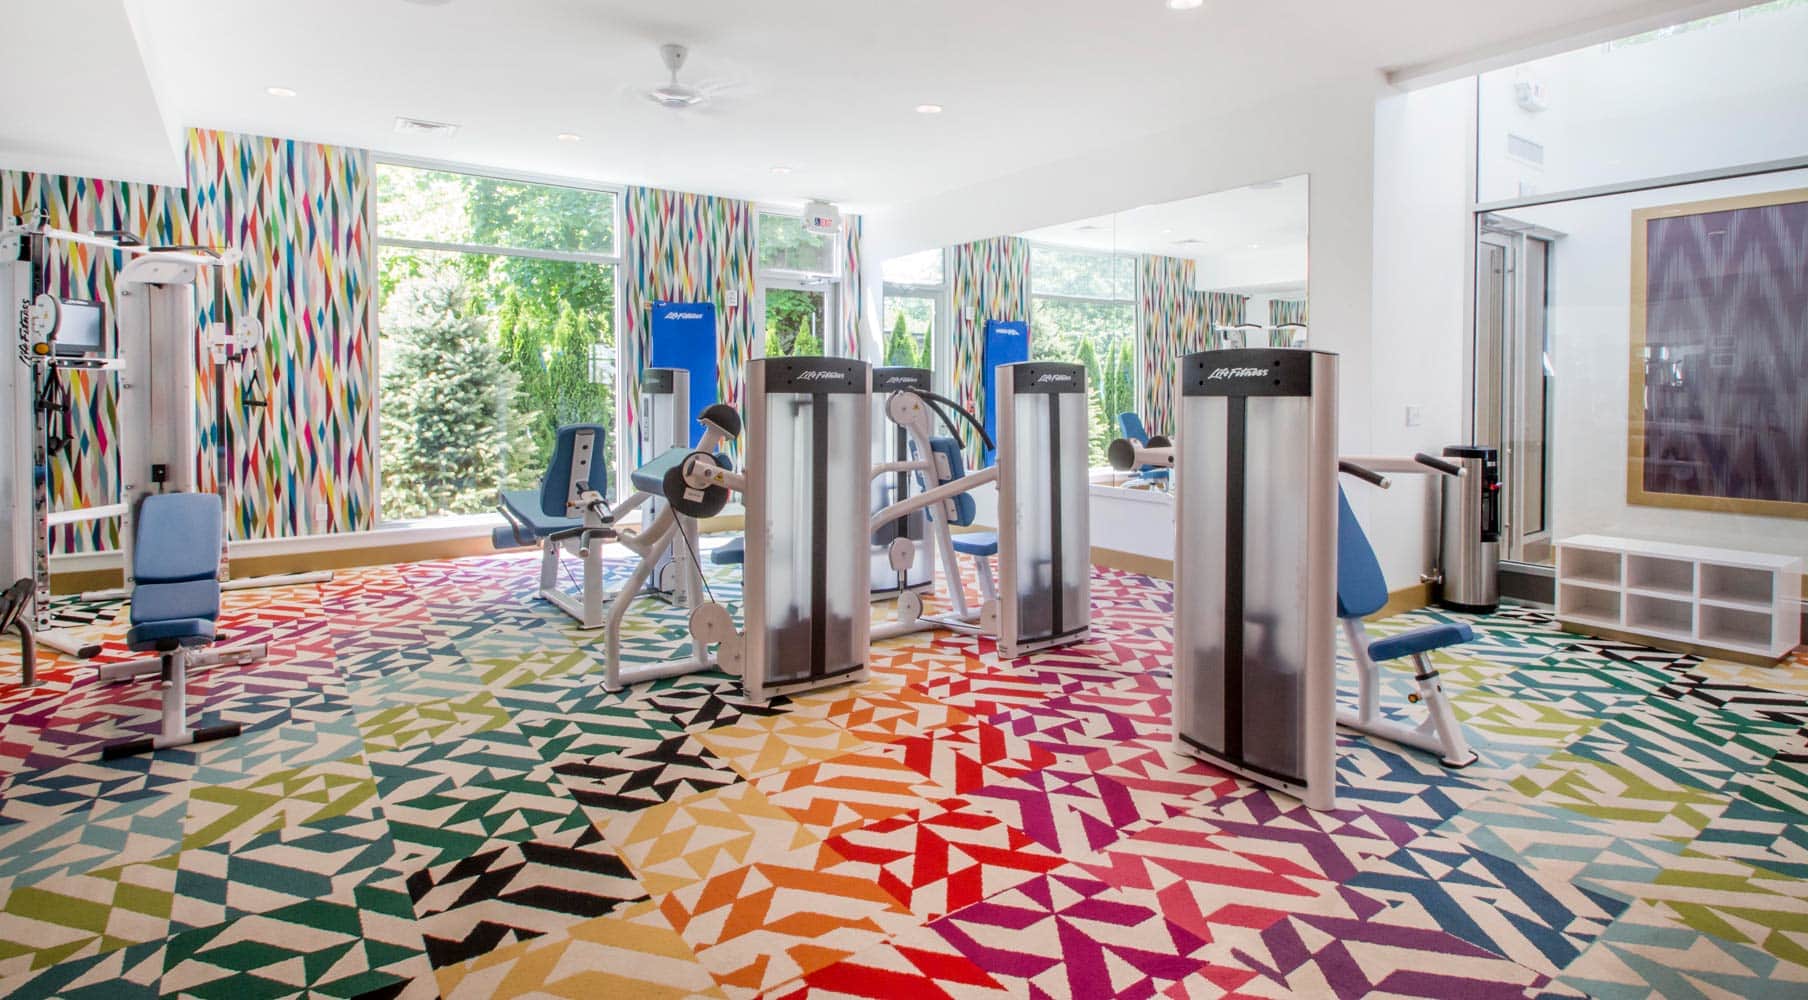 Fitness center in Stamford designed by Annette Jaffe Interiors